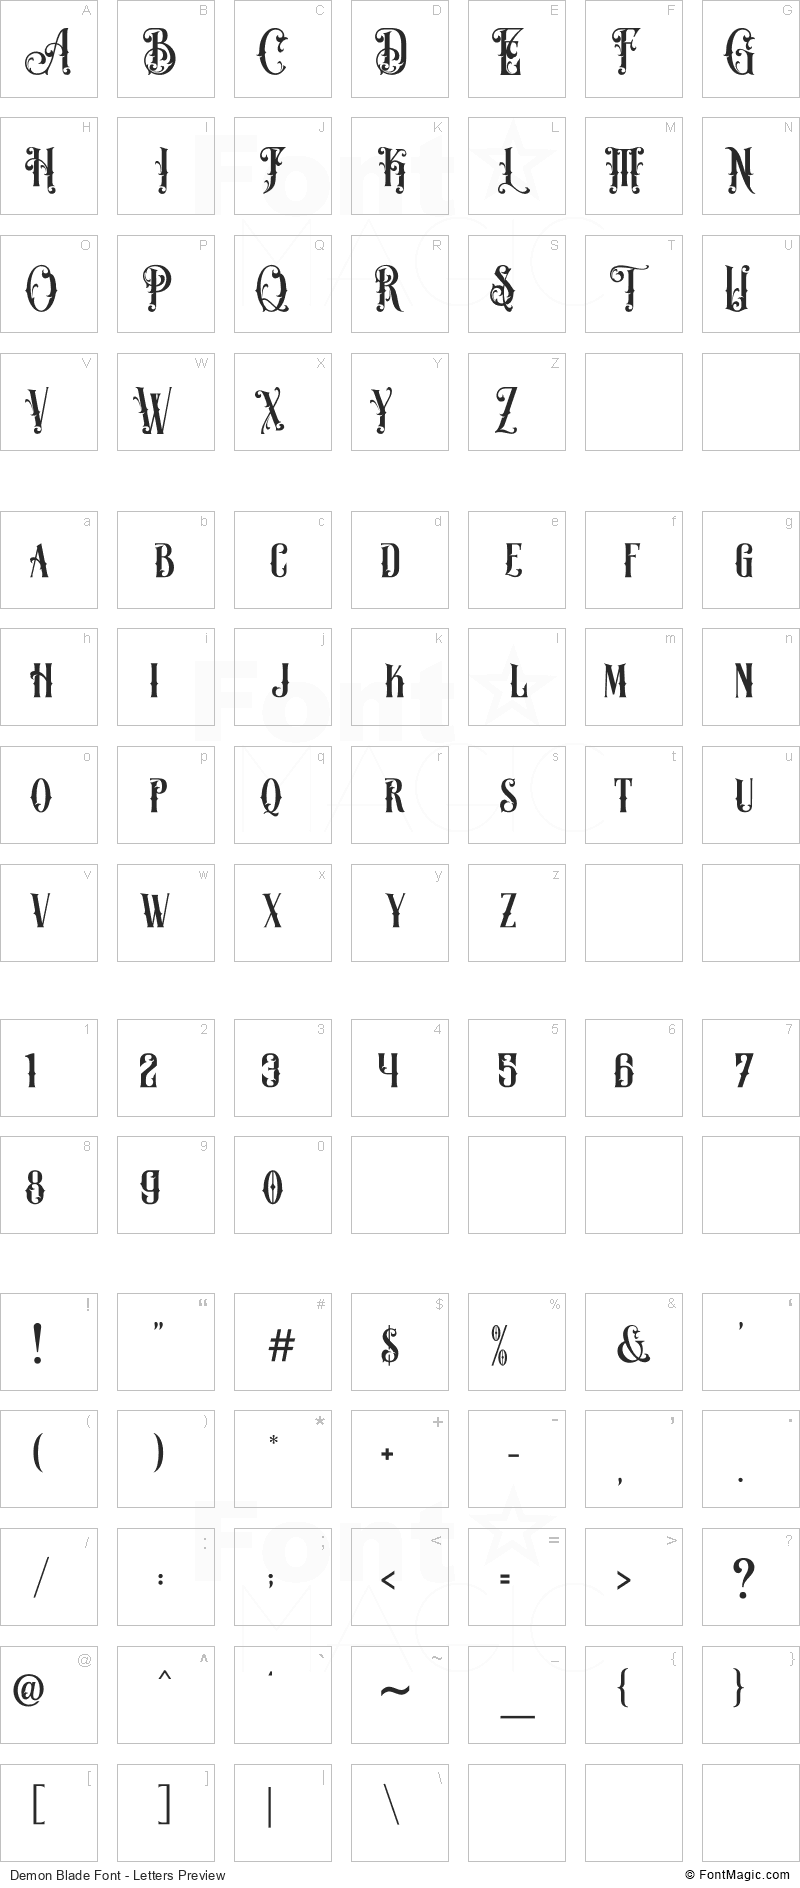 Demon Blade Font - All Latters Preview Chart